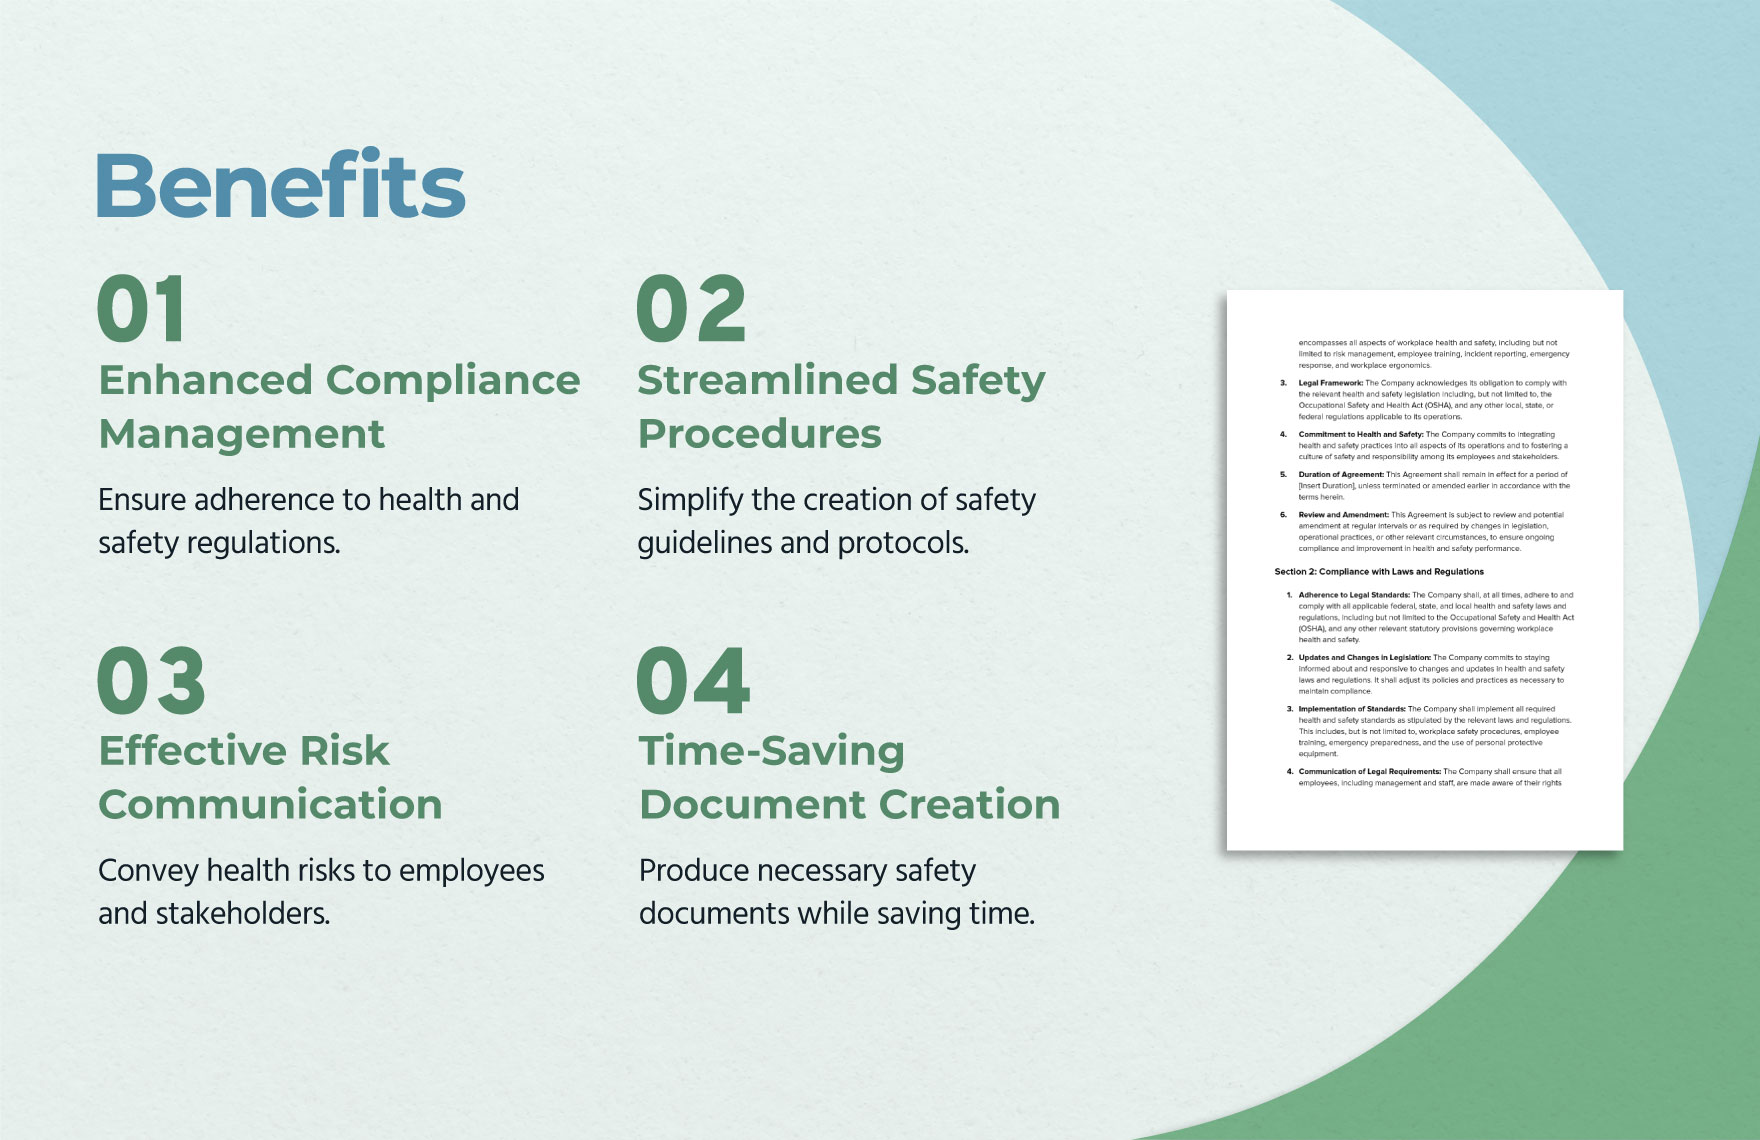 Health & Safety Legal Compliance Agreement Template